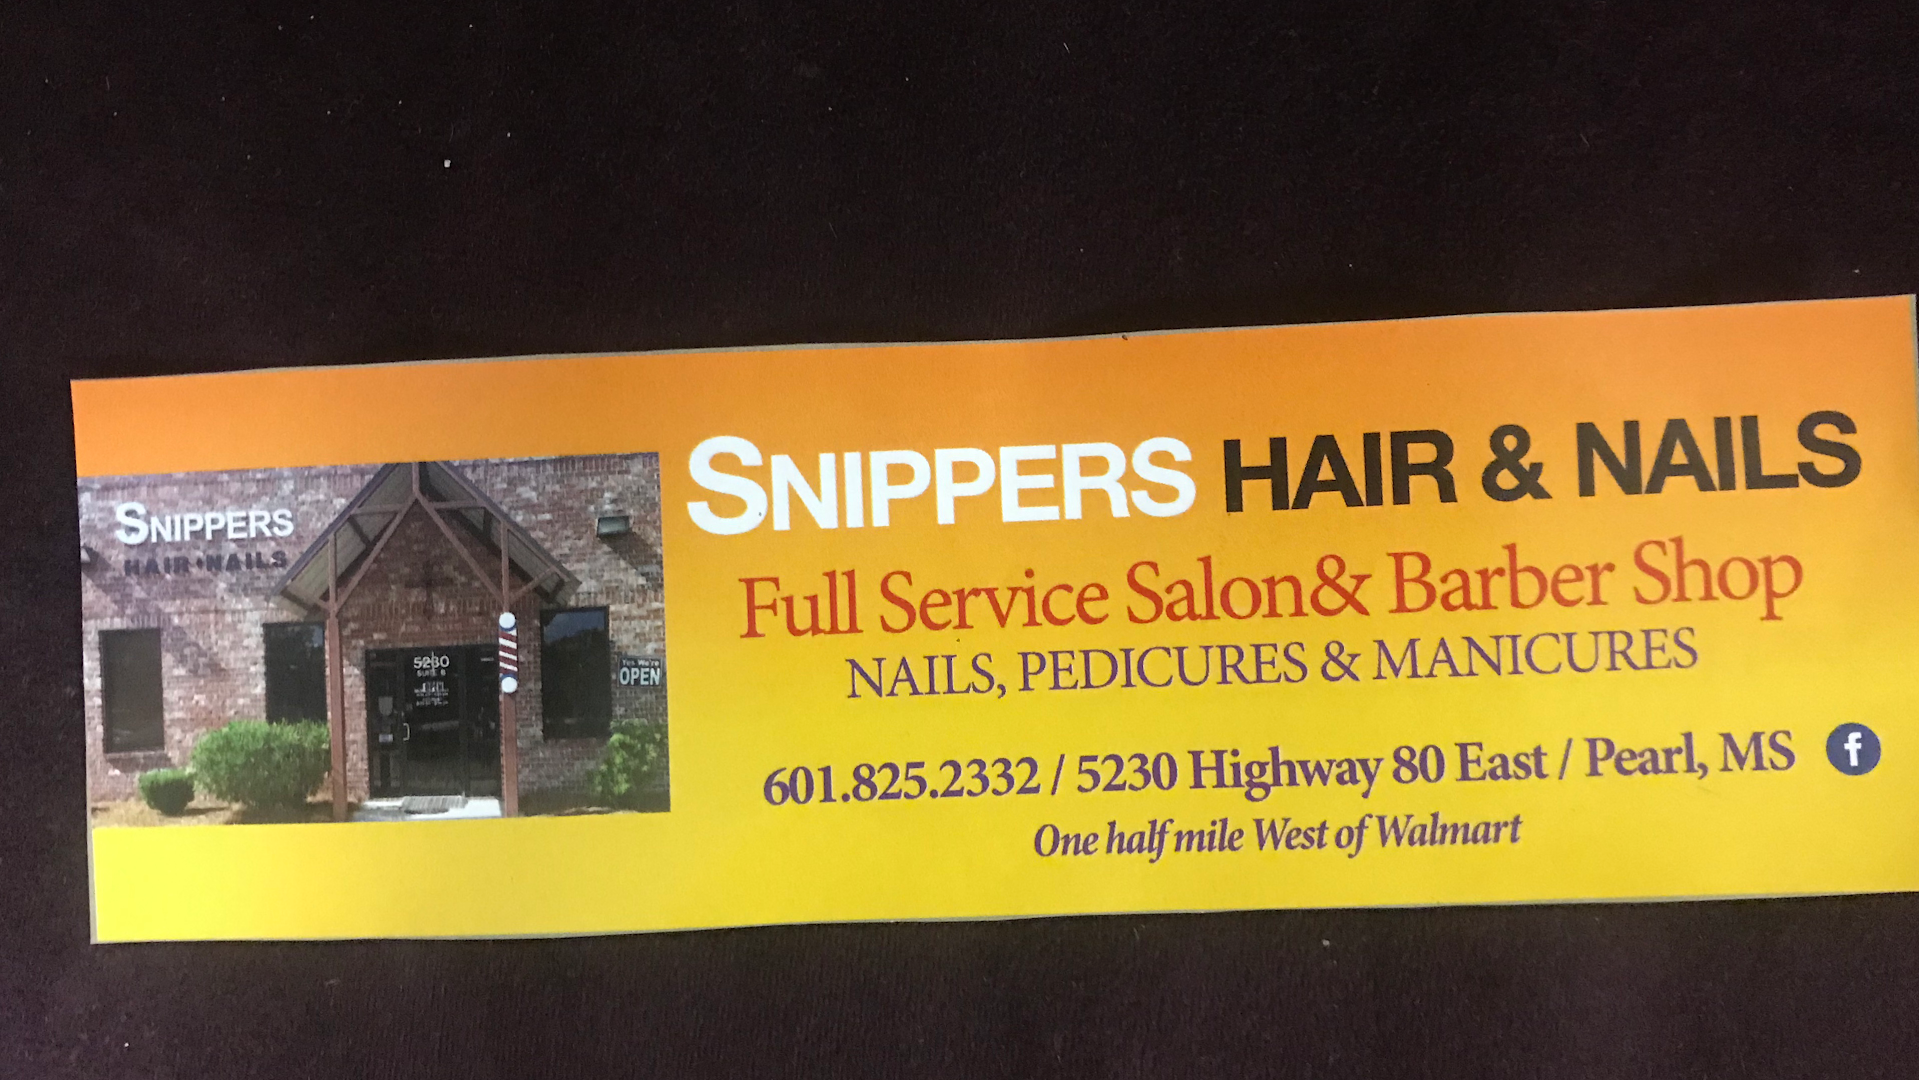 Snippers Hair & Nails